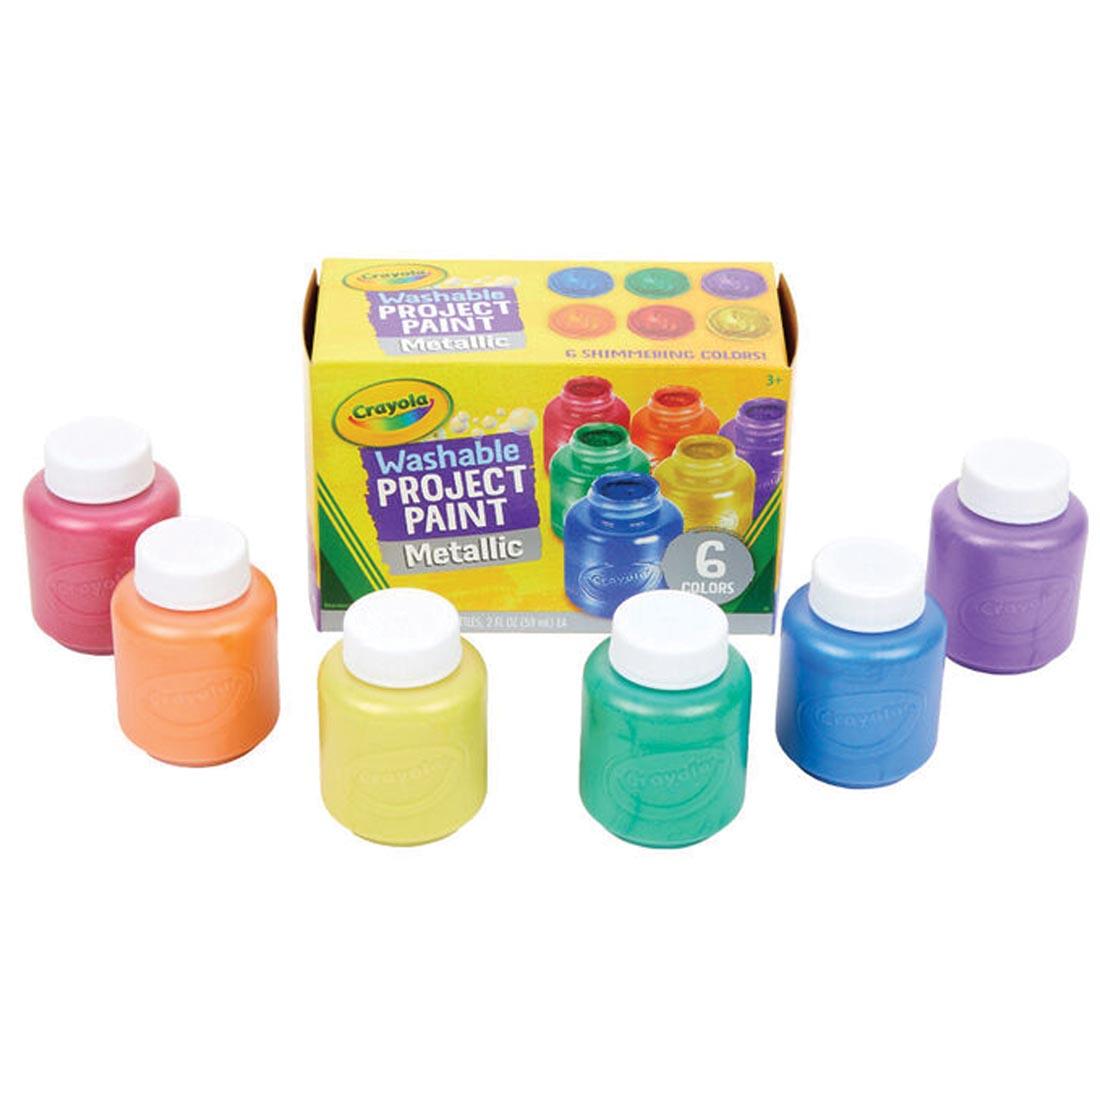 Package of Crayola Washable Metallic Project Paint shown with the six colored bottles outside the box